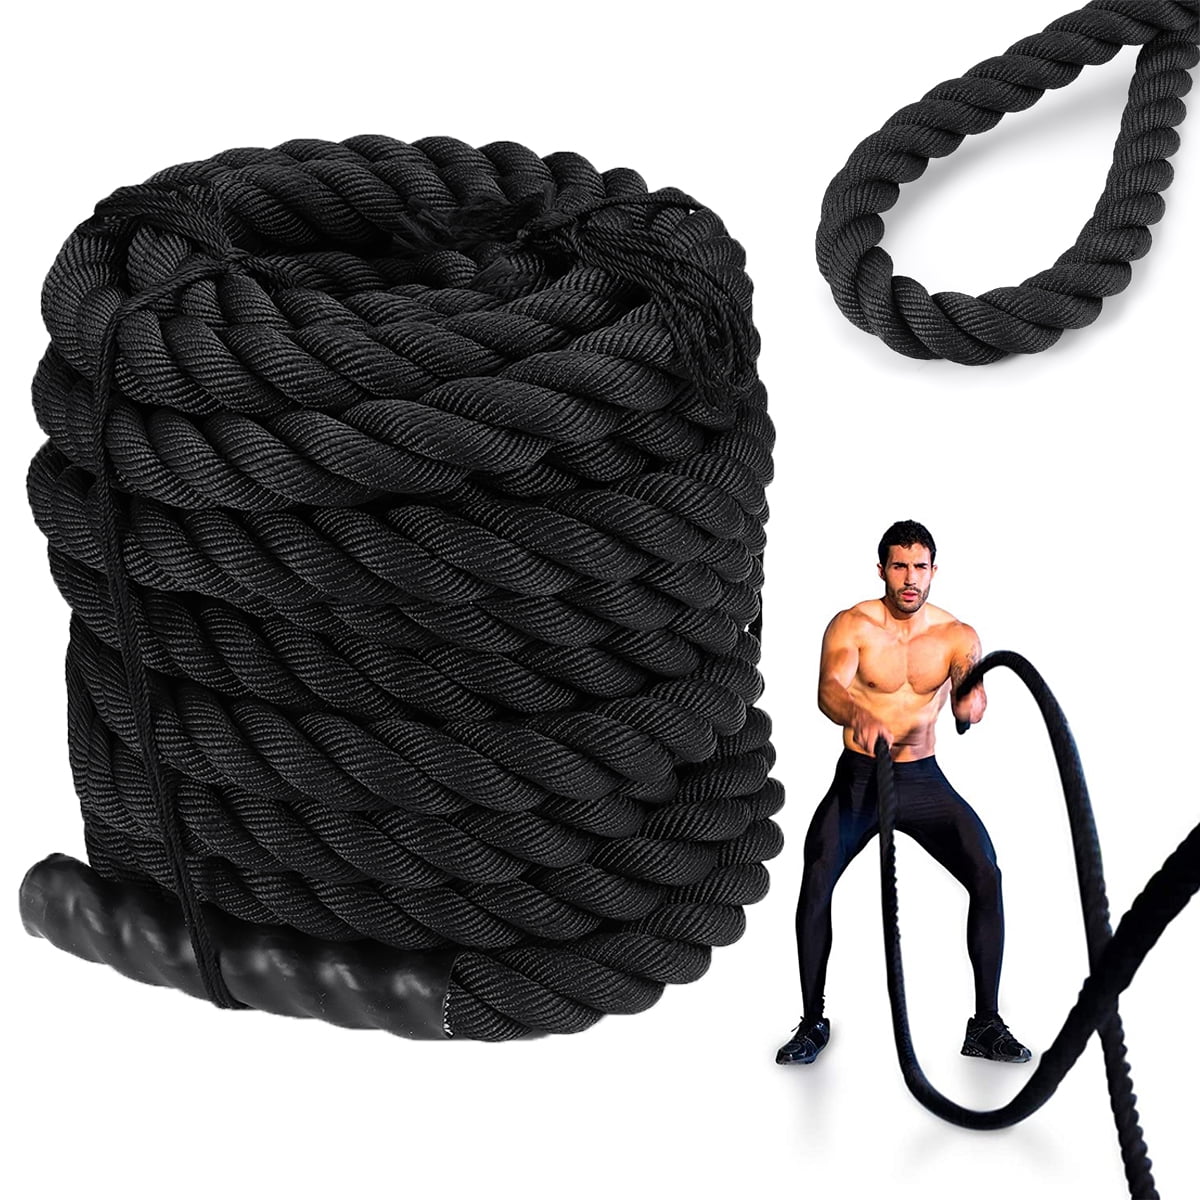 Details about   30ft 1.5" Heavy Battle Rope Fitness Climbing Training Undulation Exercise Ropes 